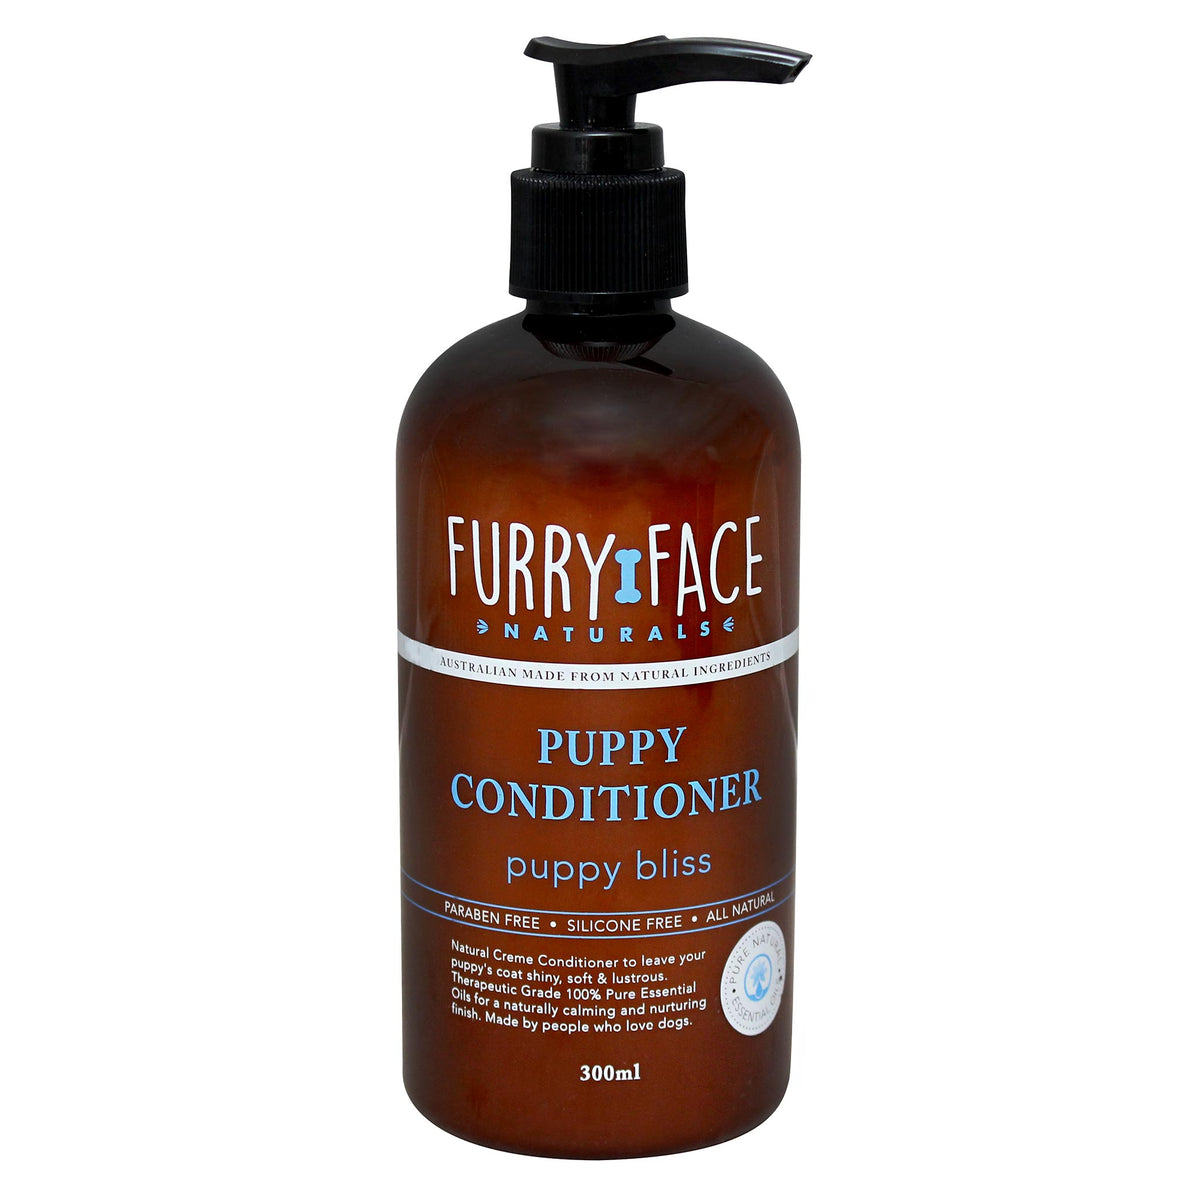 Furry Face Naturals Puppy Conditioner - Puppy Bliss 300mL